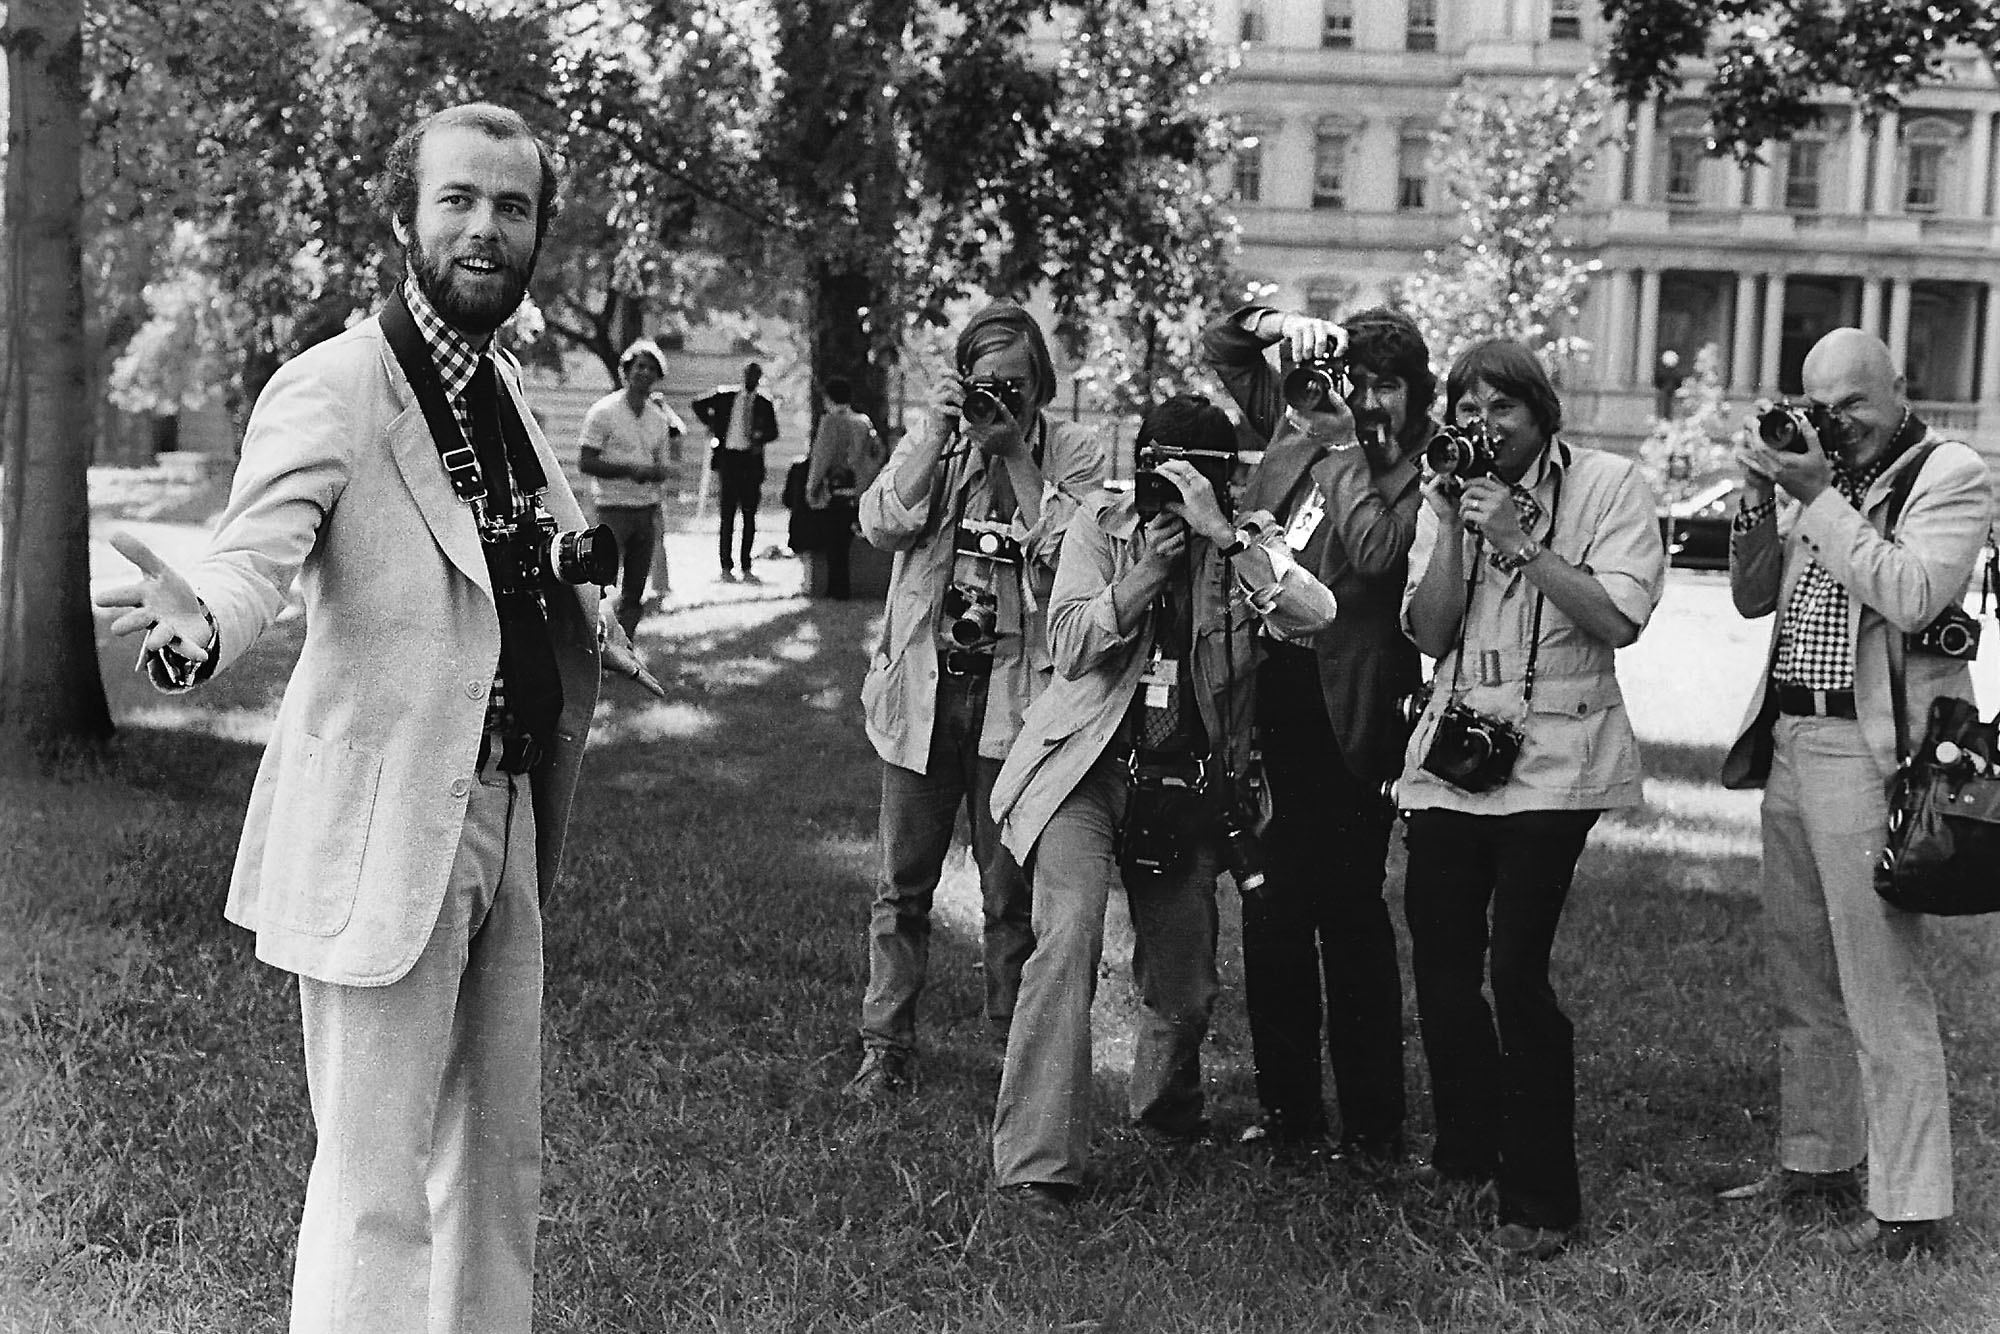 David Hume Kennerly, Photographer, and His Colleagues, White House Lawn, Washington, D.C.